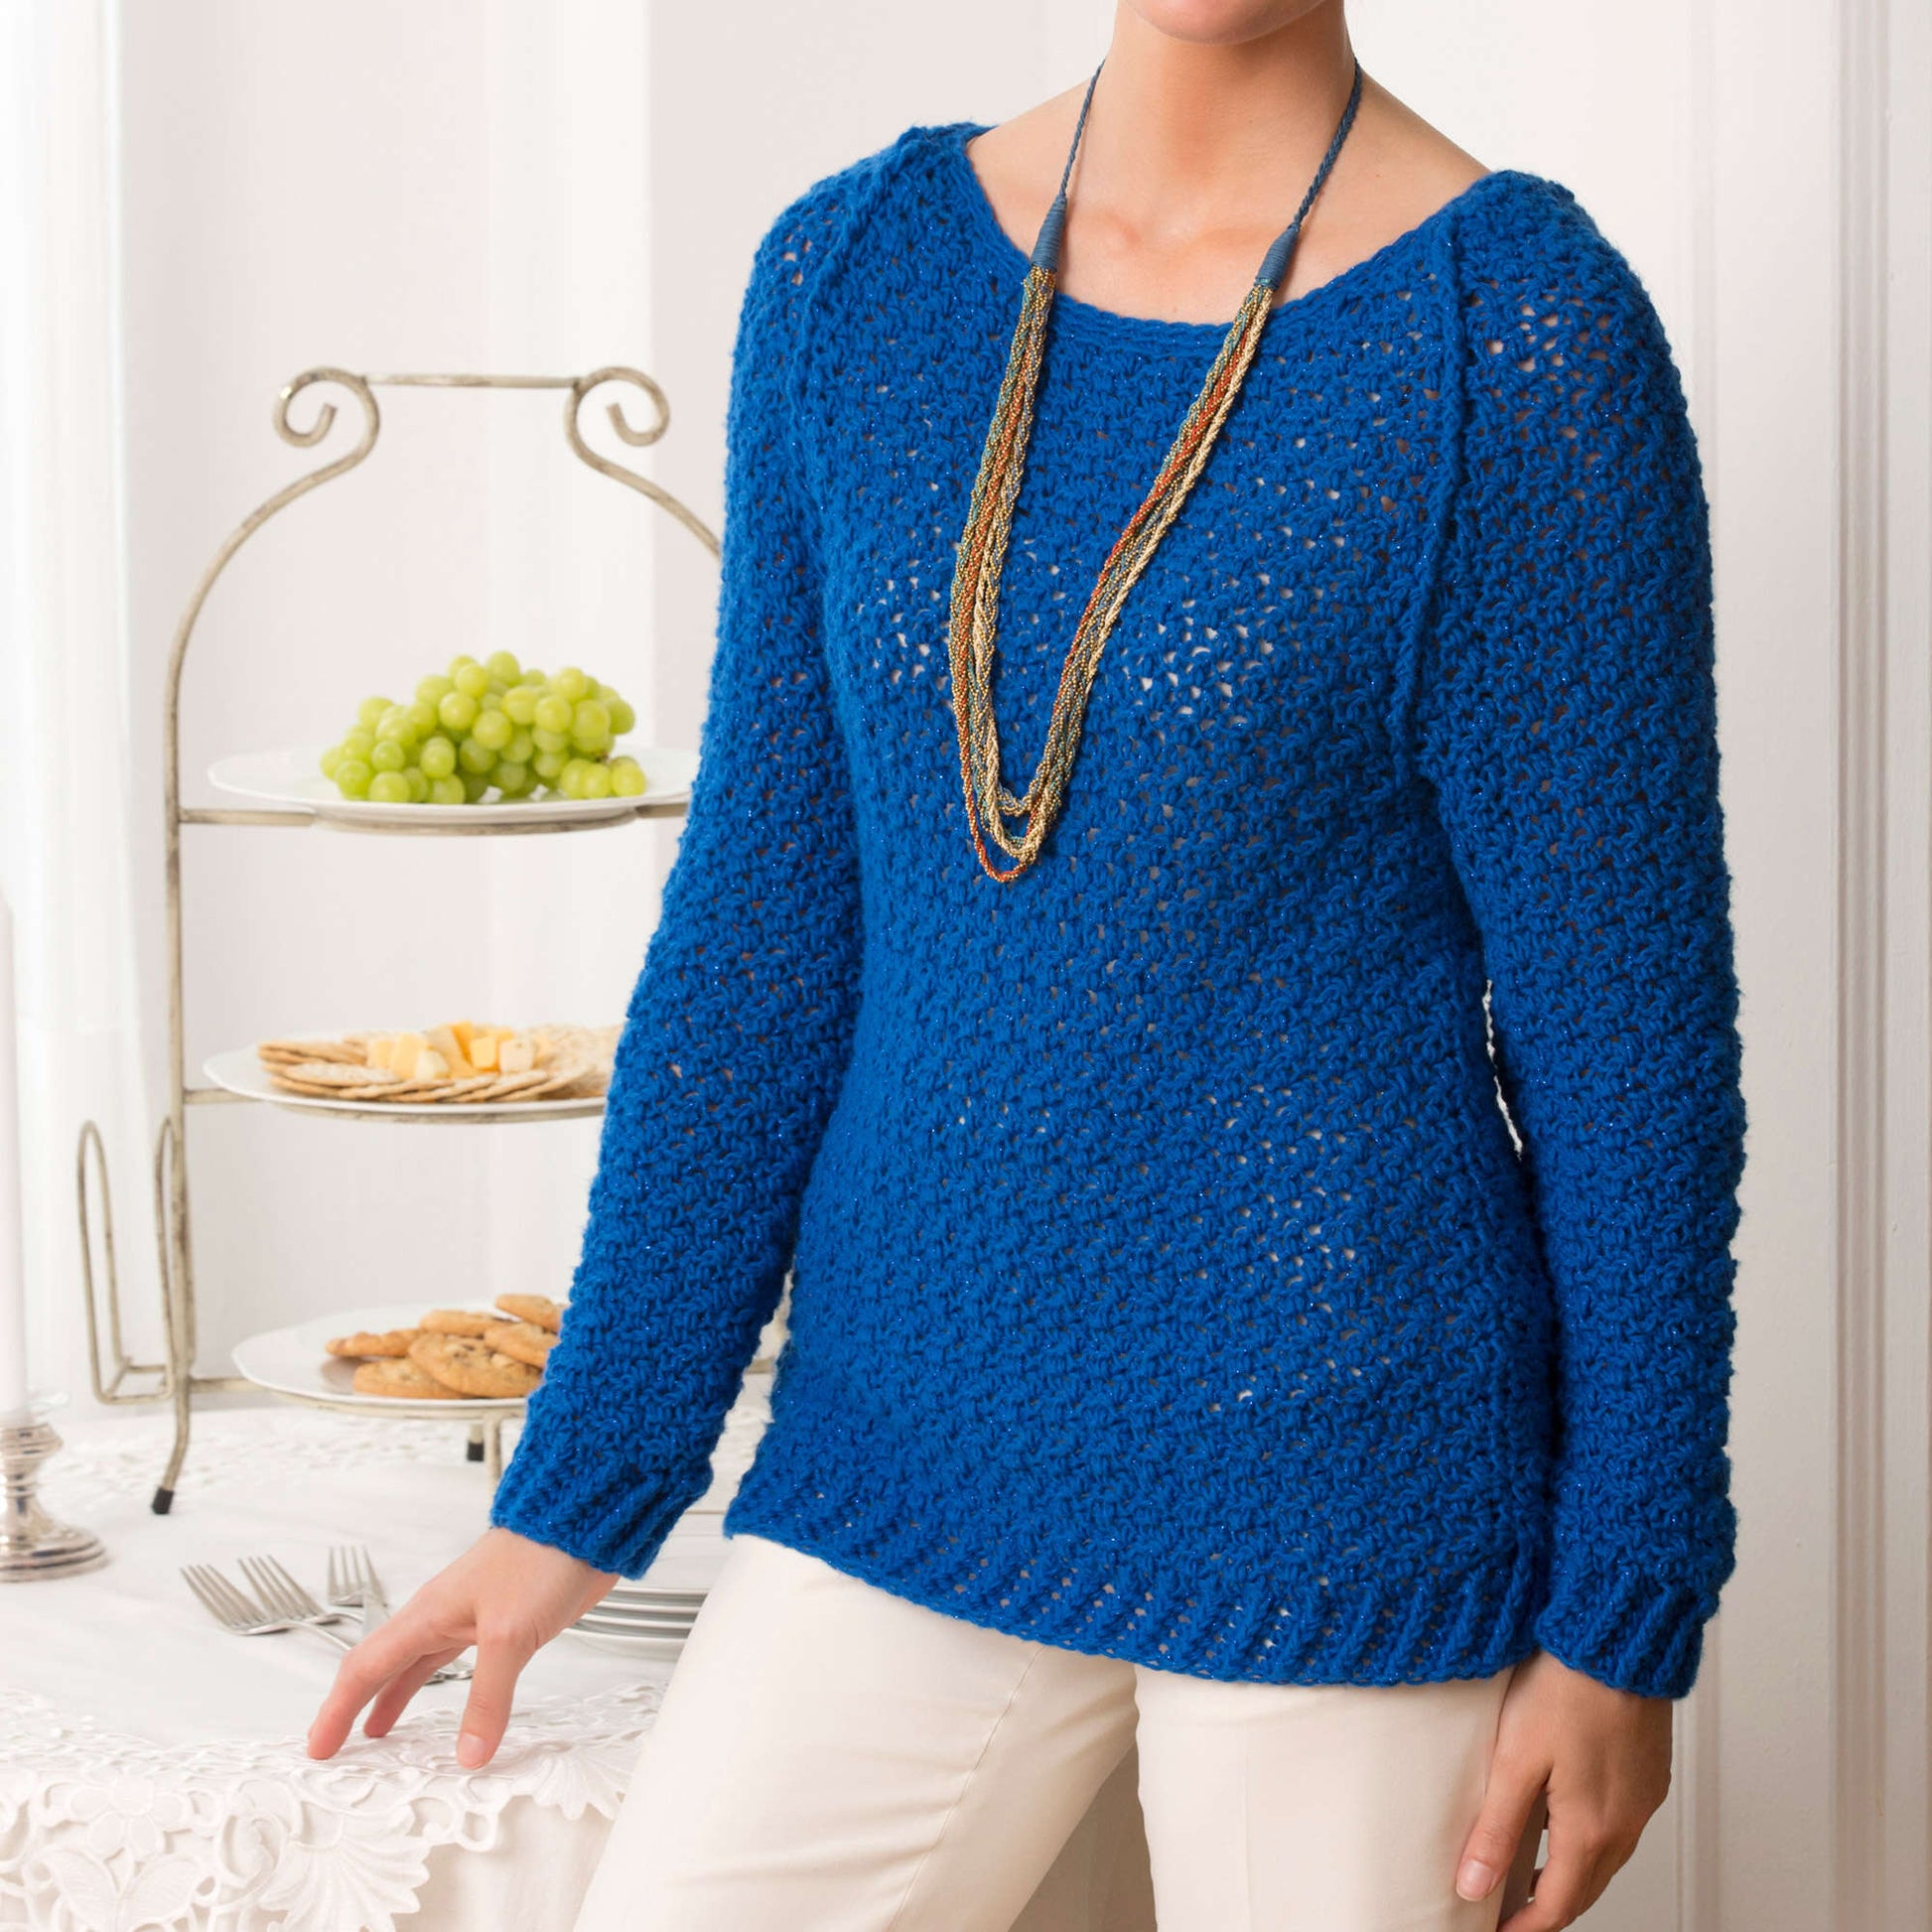 Free Red Heart Crochet Holiday Sparkle Sweater Pattern